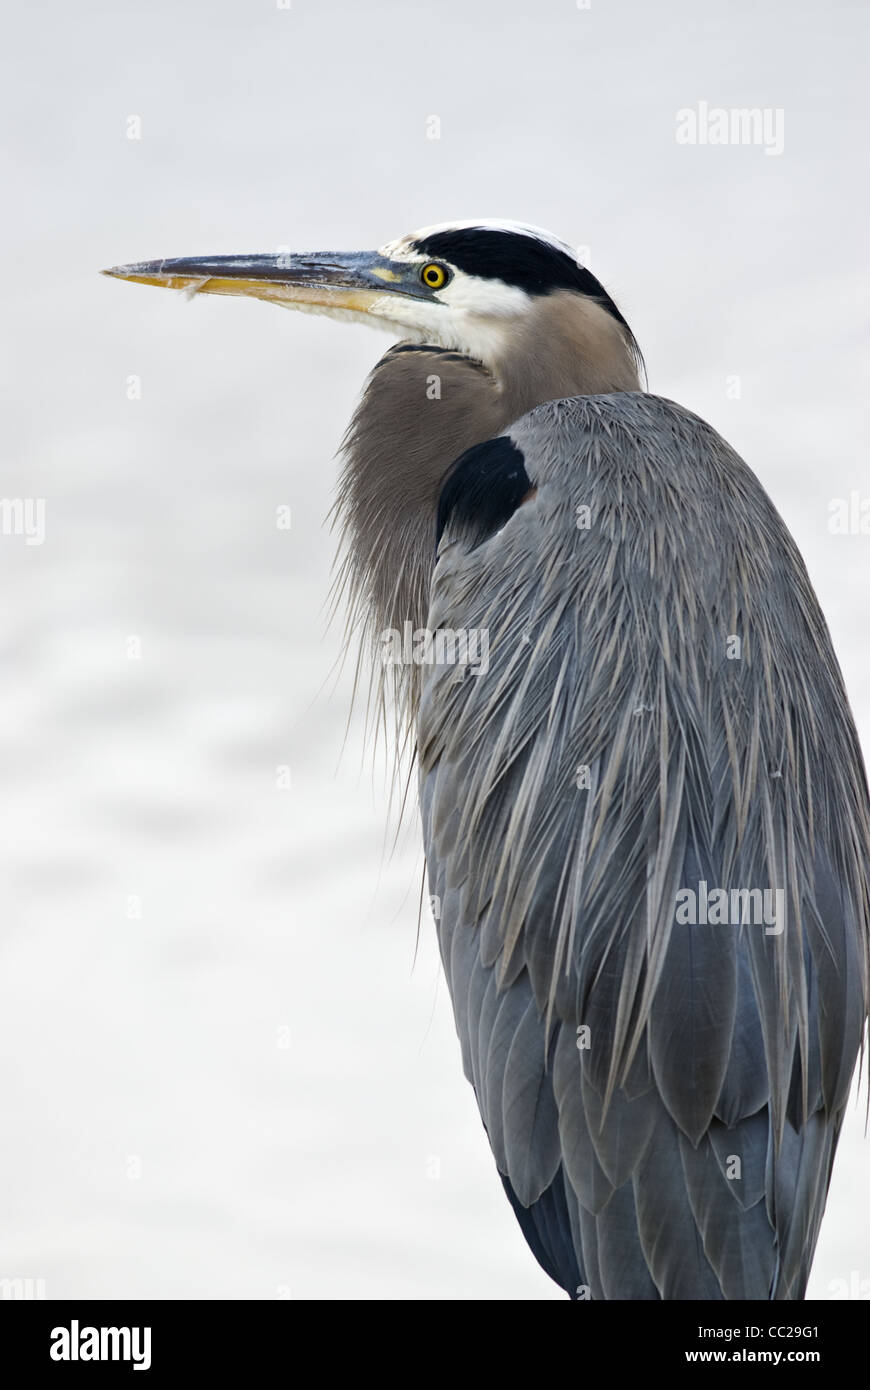 Great Blue Heron, Bosque del Apache National Wildlife Refuge, New Mexico. Stock Photo